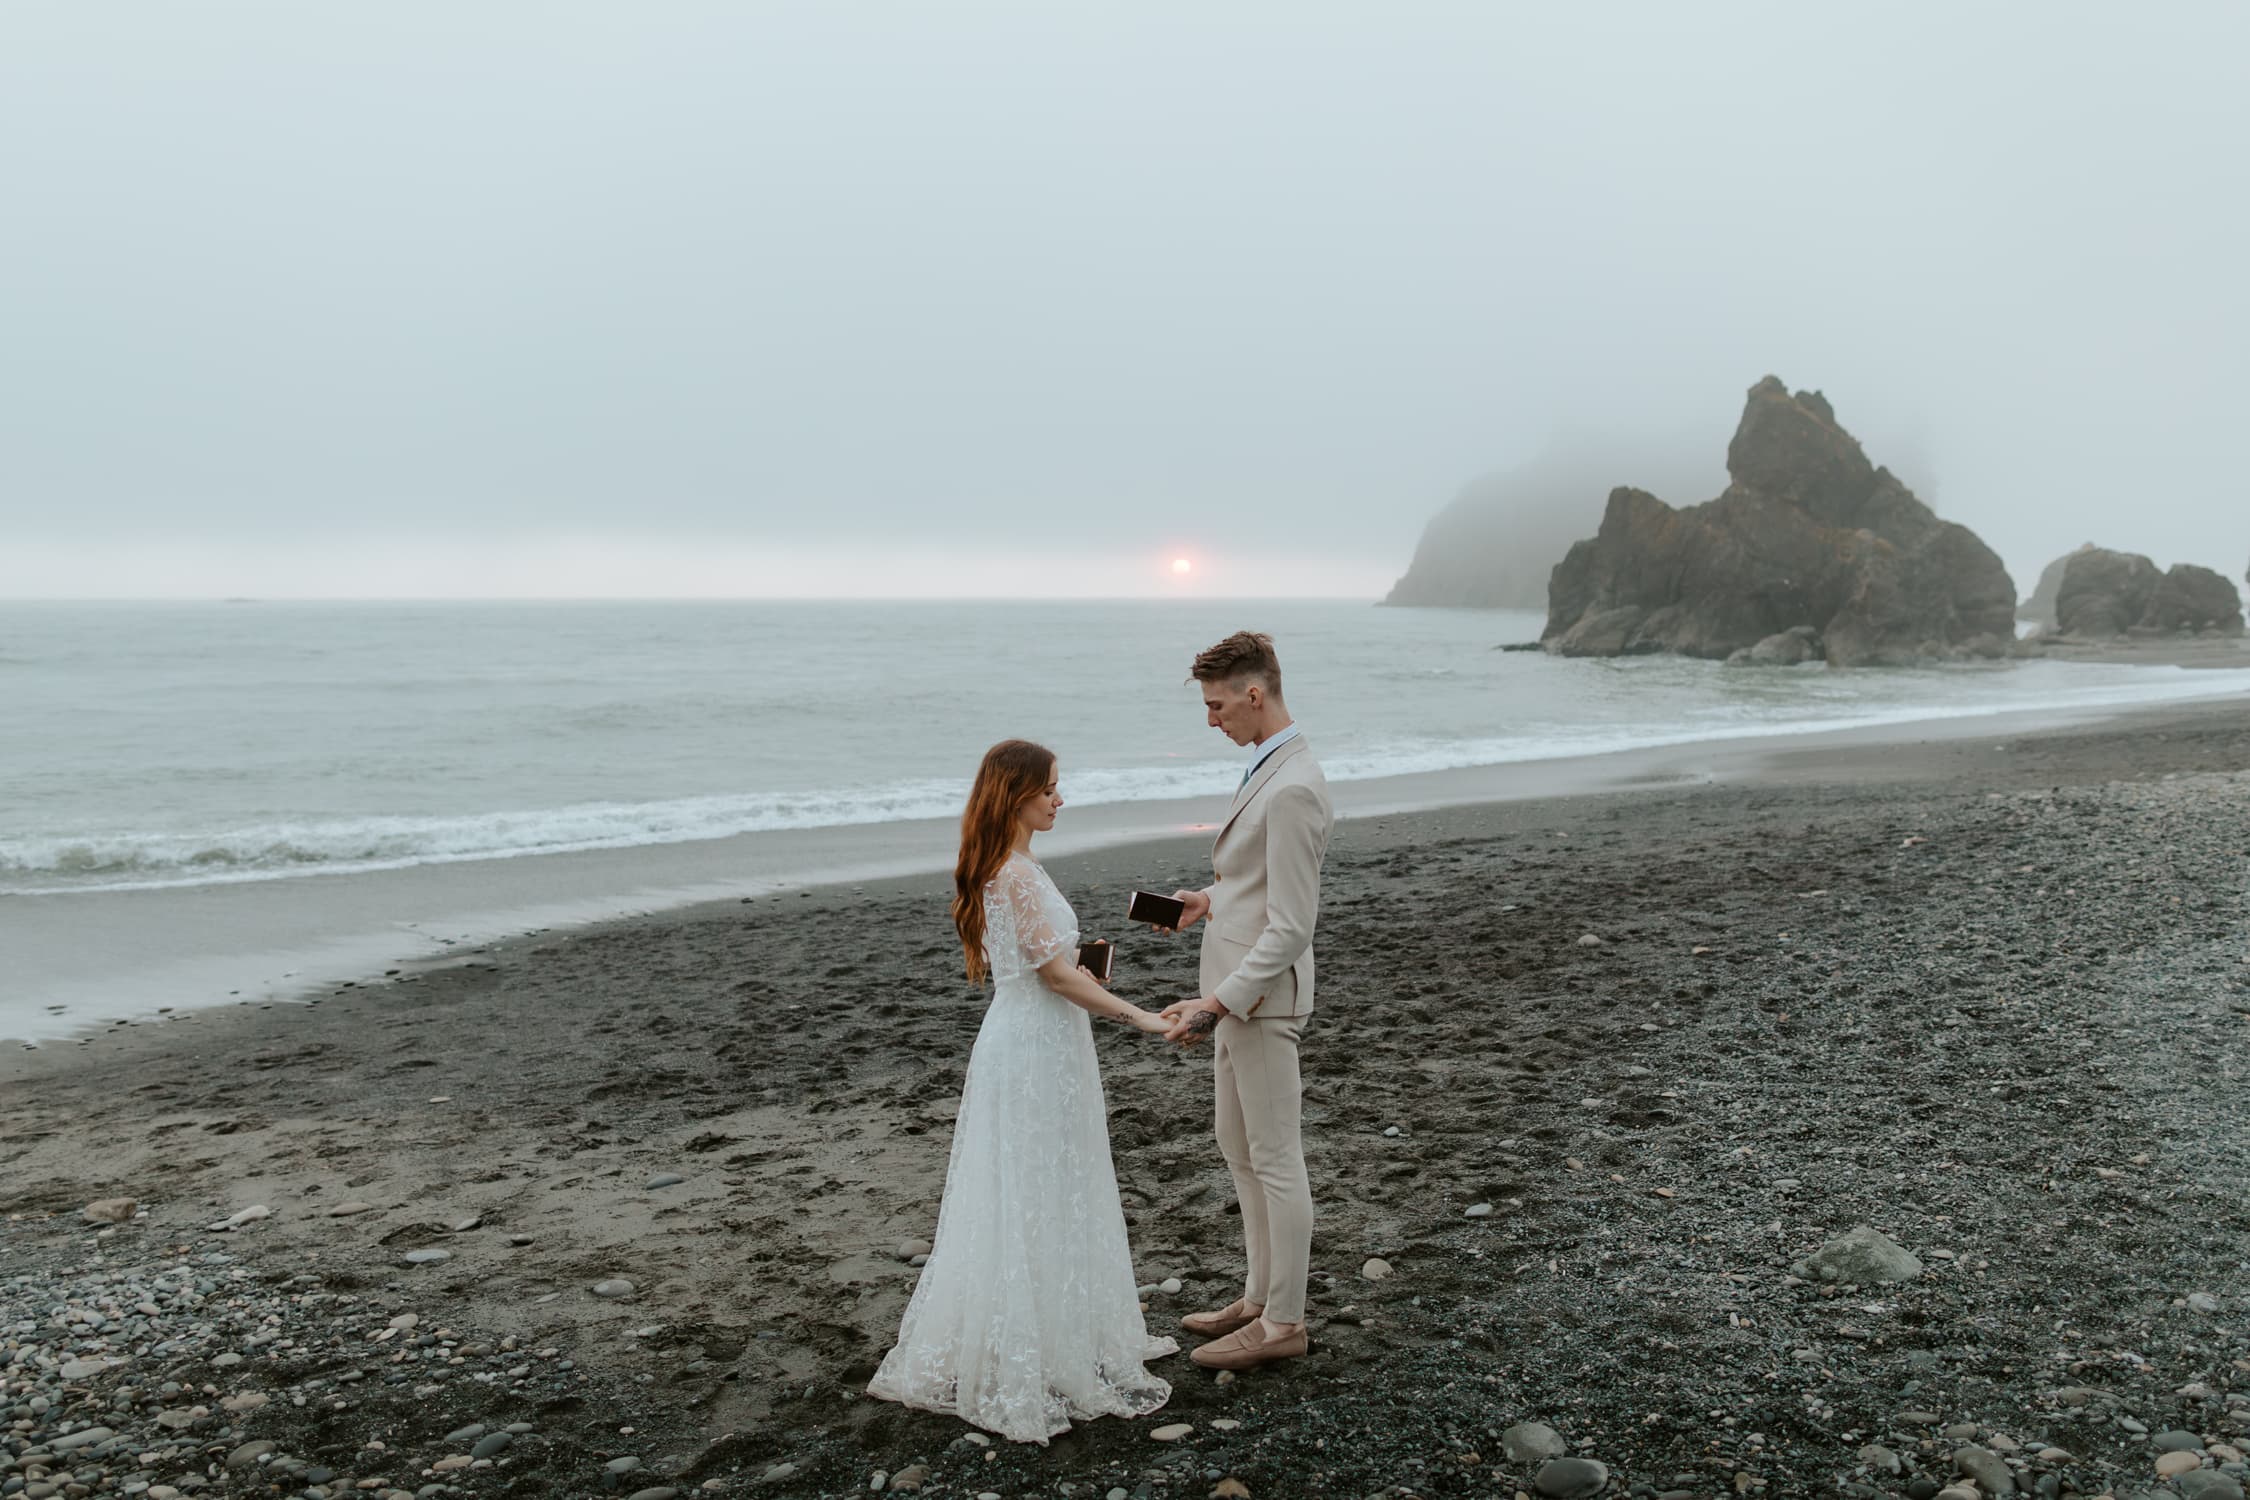 A bride and groom exchanging vows on Ruby Beach on their elopement day.